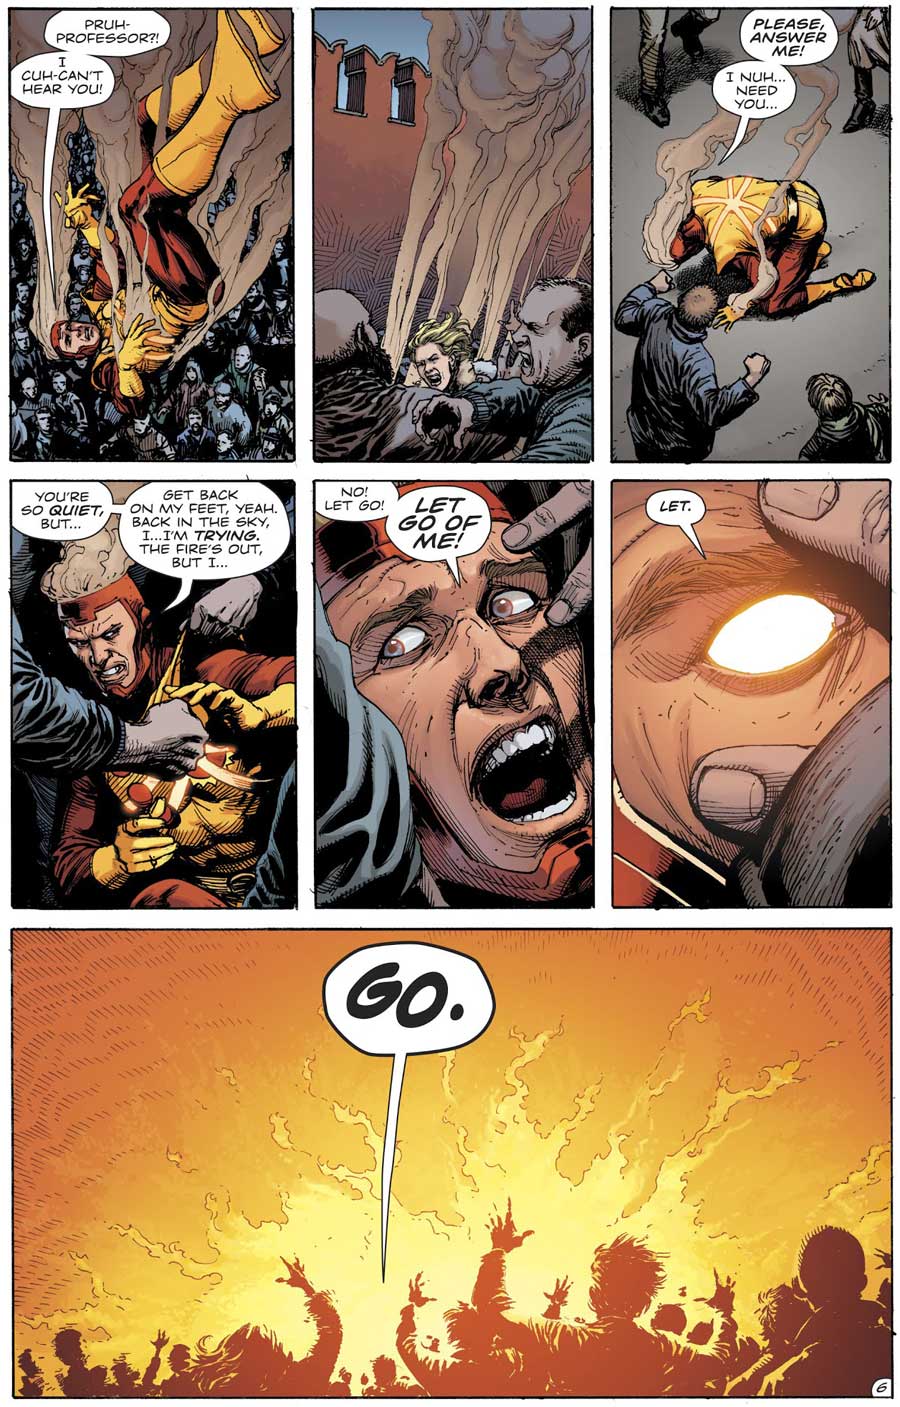 Doomsday Clock #8 by Geoff Johns and Gary Frank featuring Firestorm